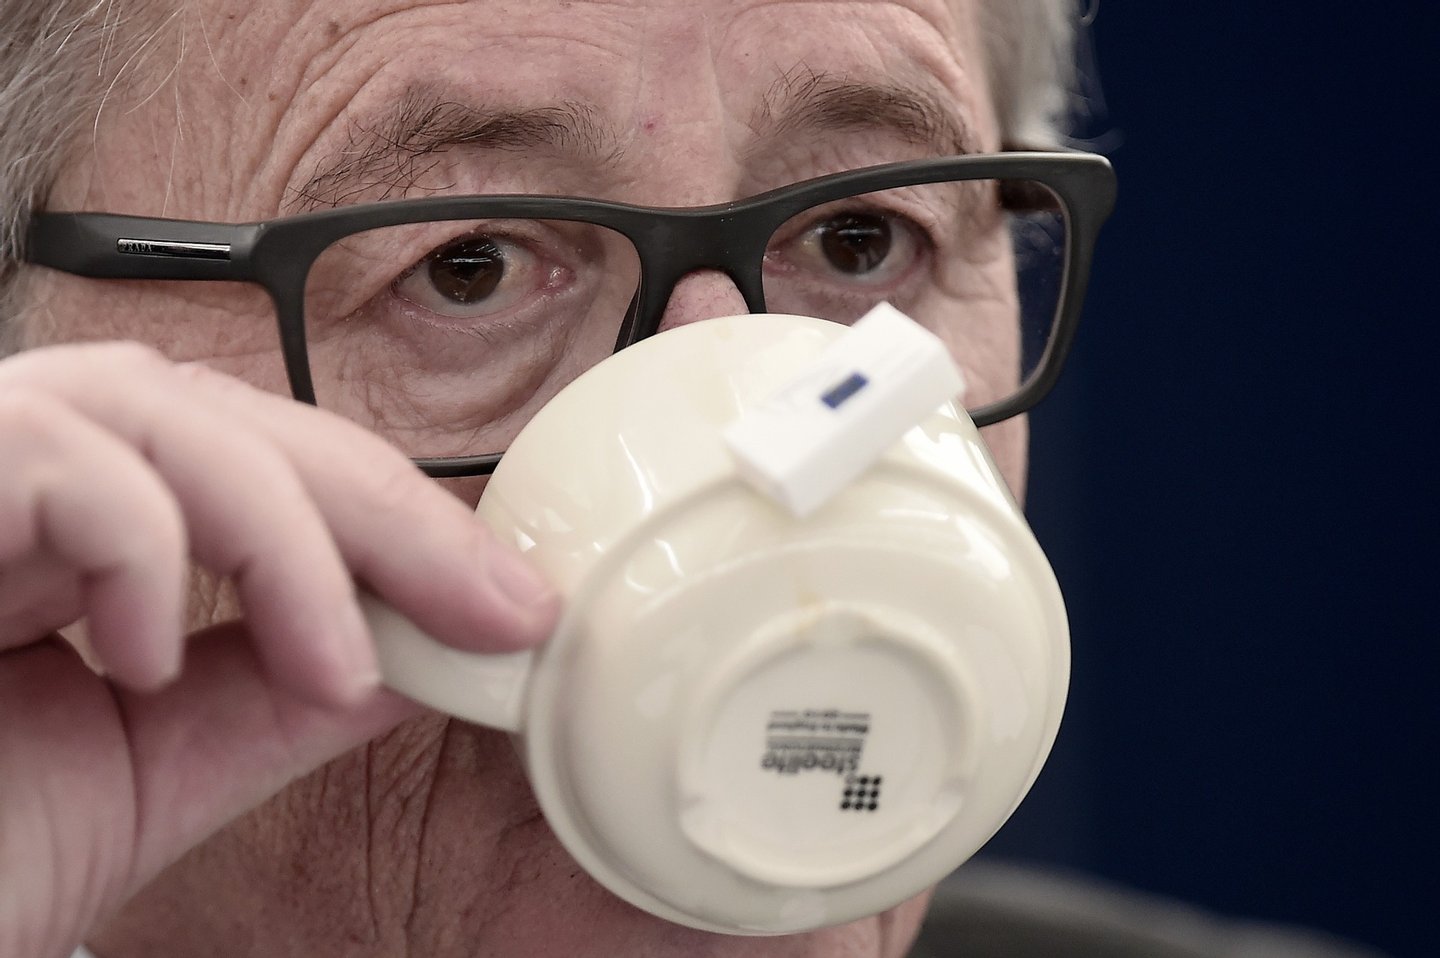 European Commission's President Jean-Claude Juncker takes a drink as he attends a debate on the 13 November terrorist attacks in Paris and subsequent police and military operations at the European Parliament in Strasbourg, eastern France, on November 25, 2015. AFP PHOTO/FREDERICK FLORIN / AFP / FREDERICK FLORIN (Photo credit should read FREDERICK FLORIN/AFP/Getty Images)